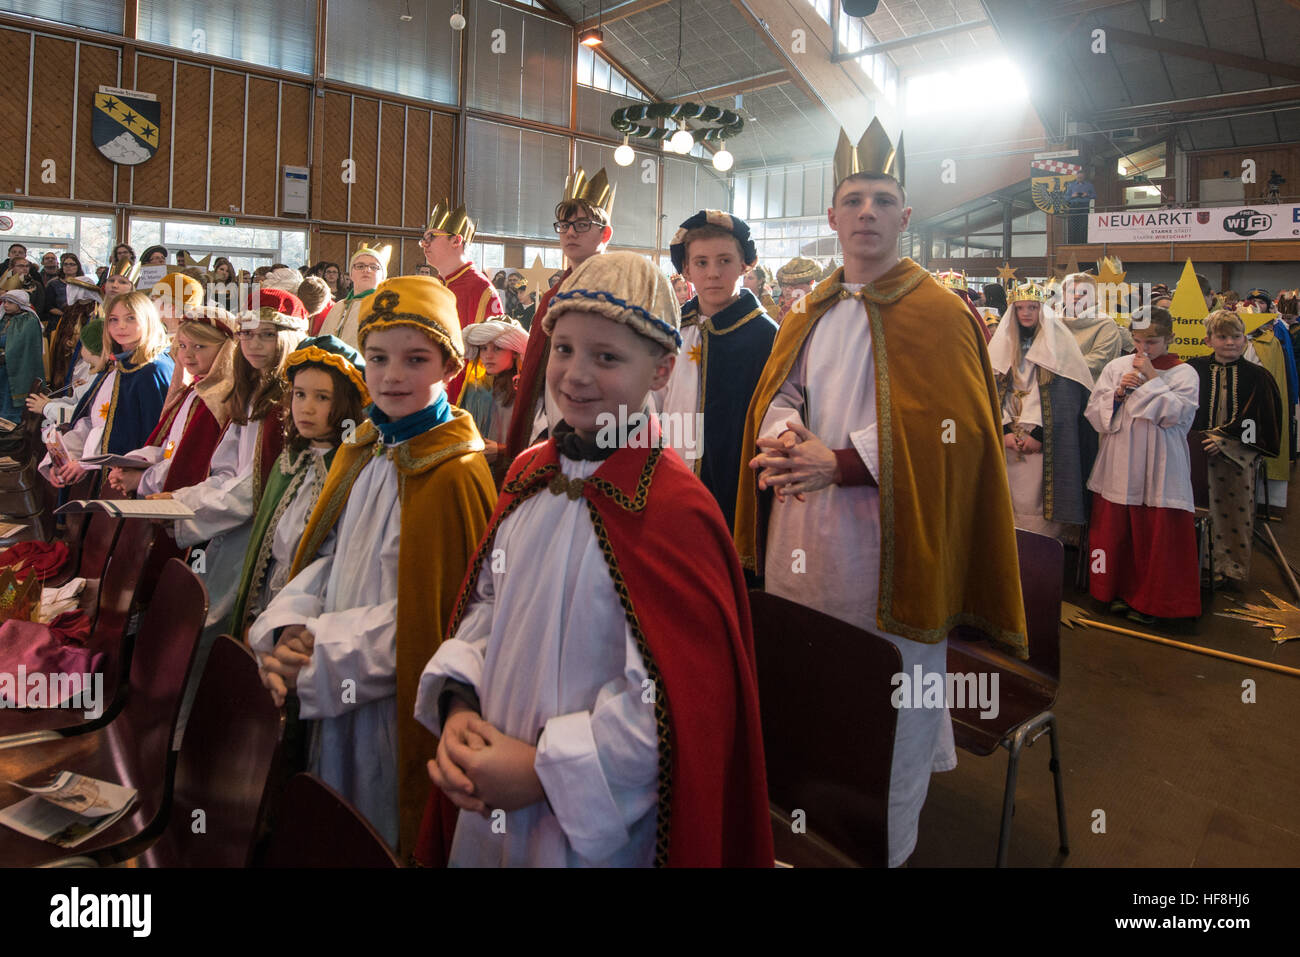 Star singers (also known as epiphany singers) take part in the opening ceremony of the nationwide German star singing action in Neumarkt in der Oberpfalz, Germany, 29 December 2016. Star singers travel from house to house and ask for donations to charitable causes across the world every 6th January. Photo: Armin Weigel/dpa Stock Photo